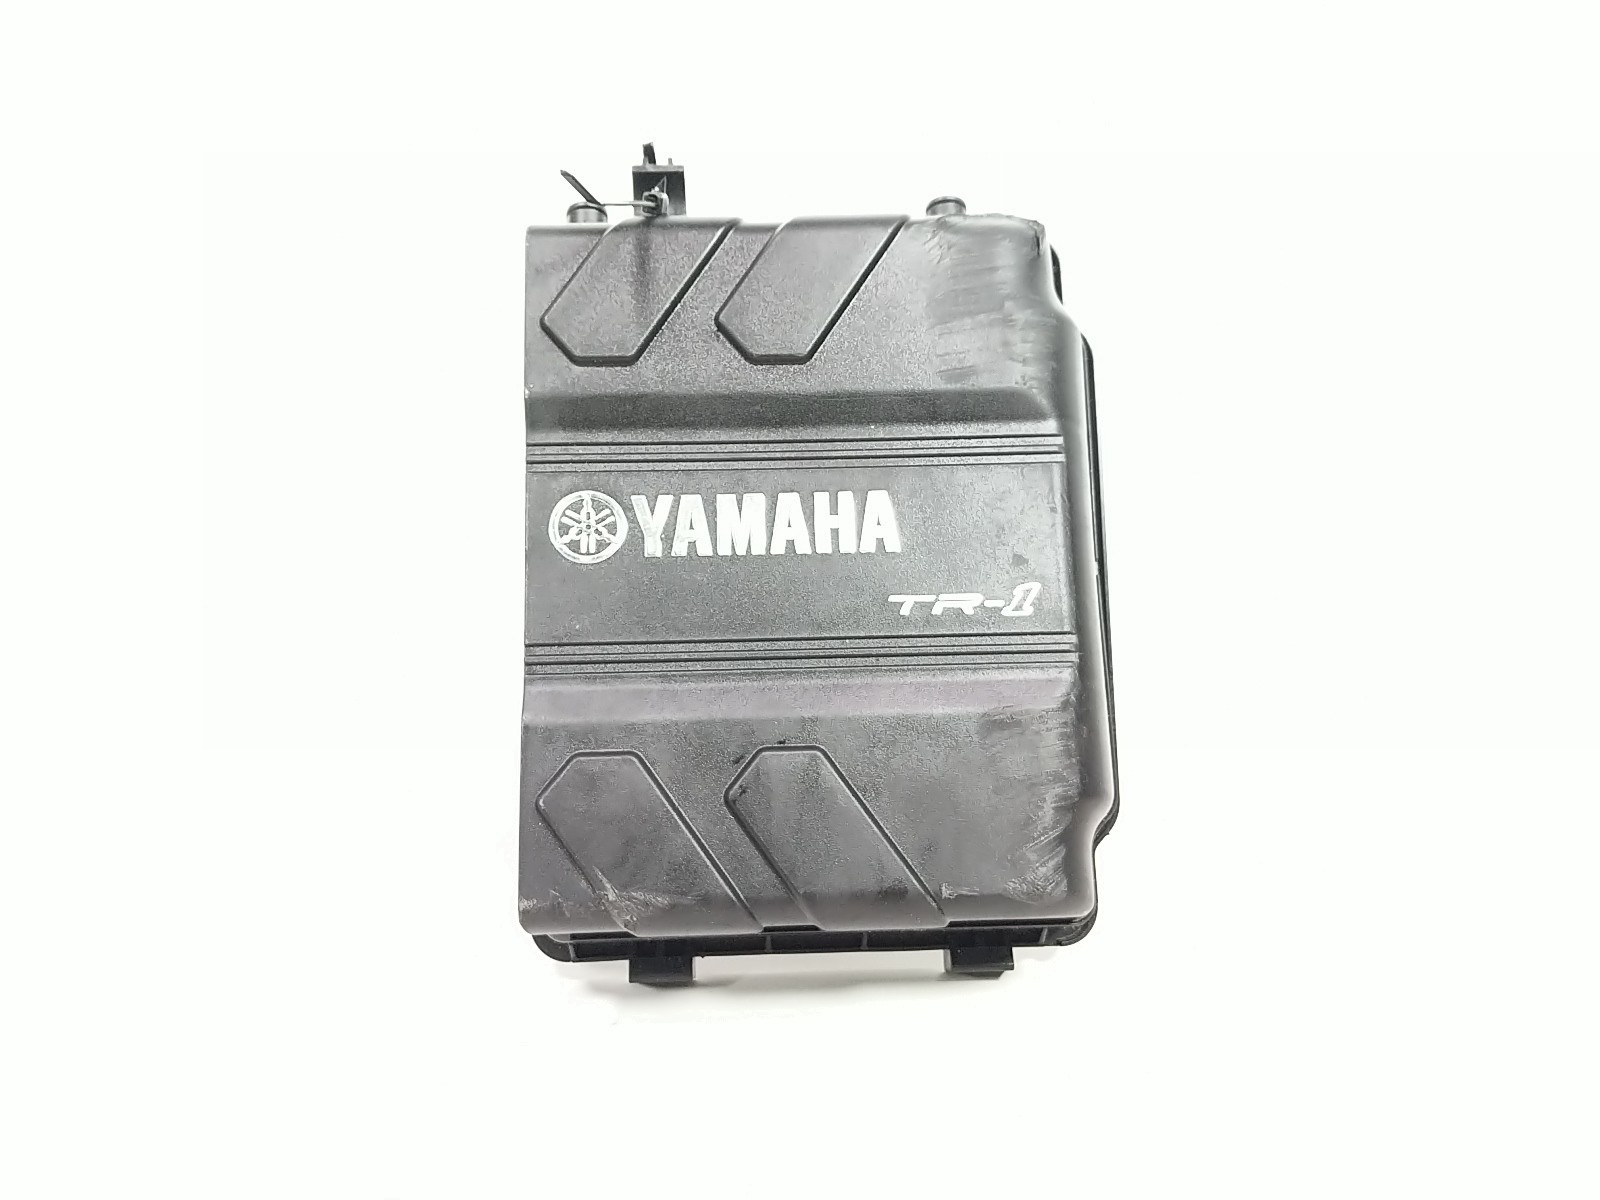 20 Yamaha Wave Runner EX Intake Air Filter Cleaner Box Cover Lid